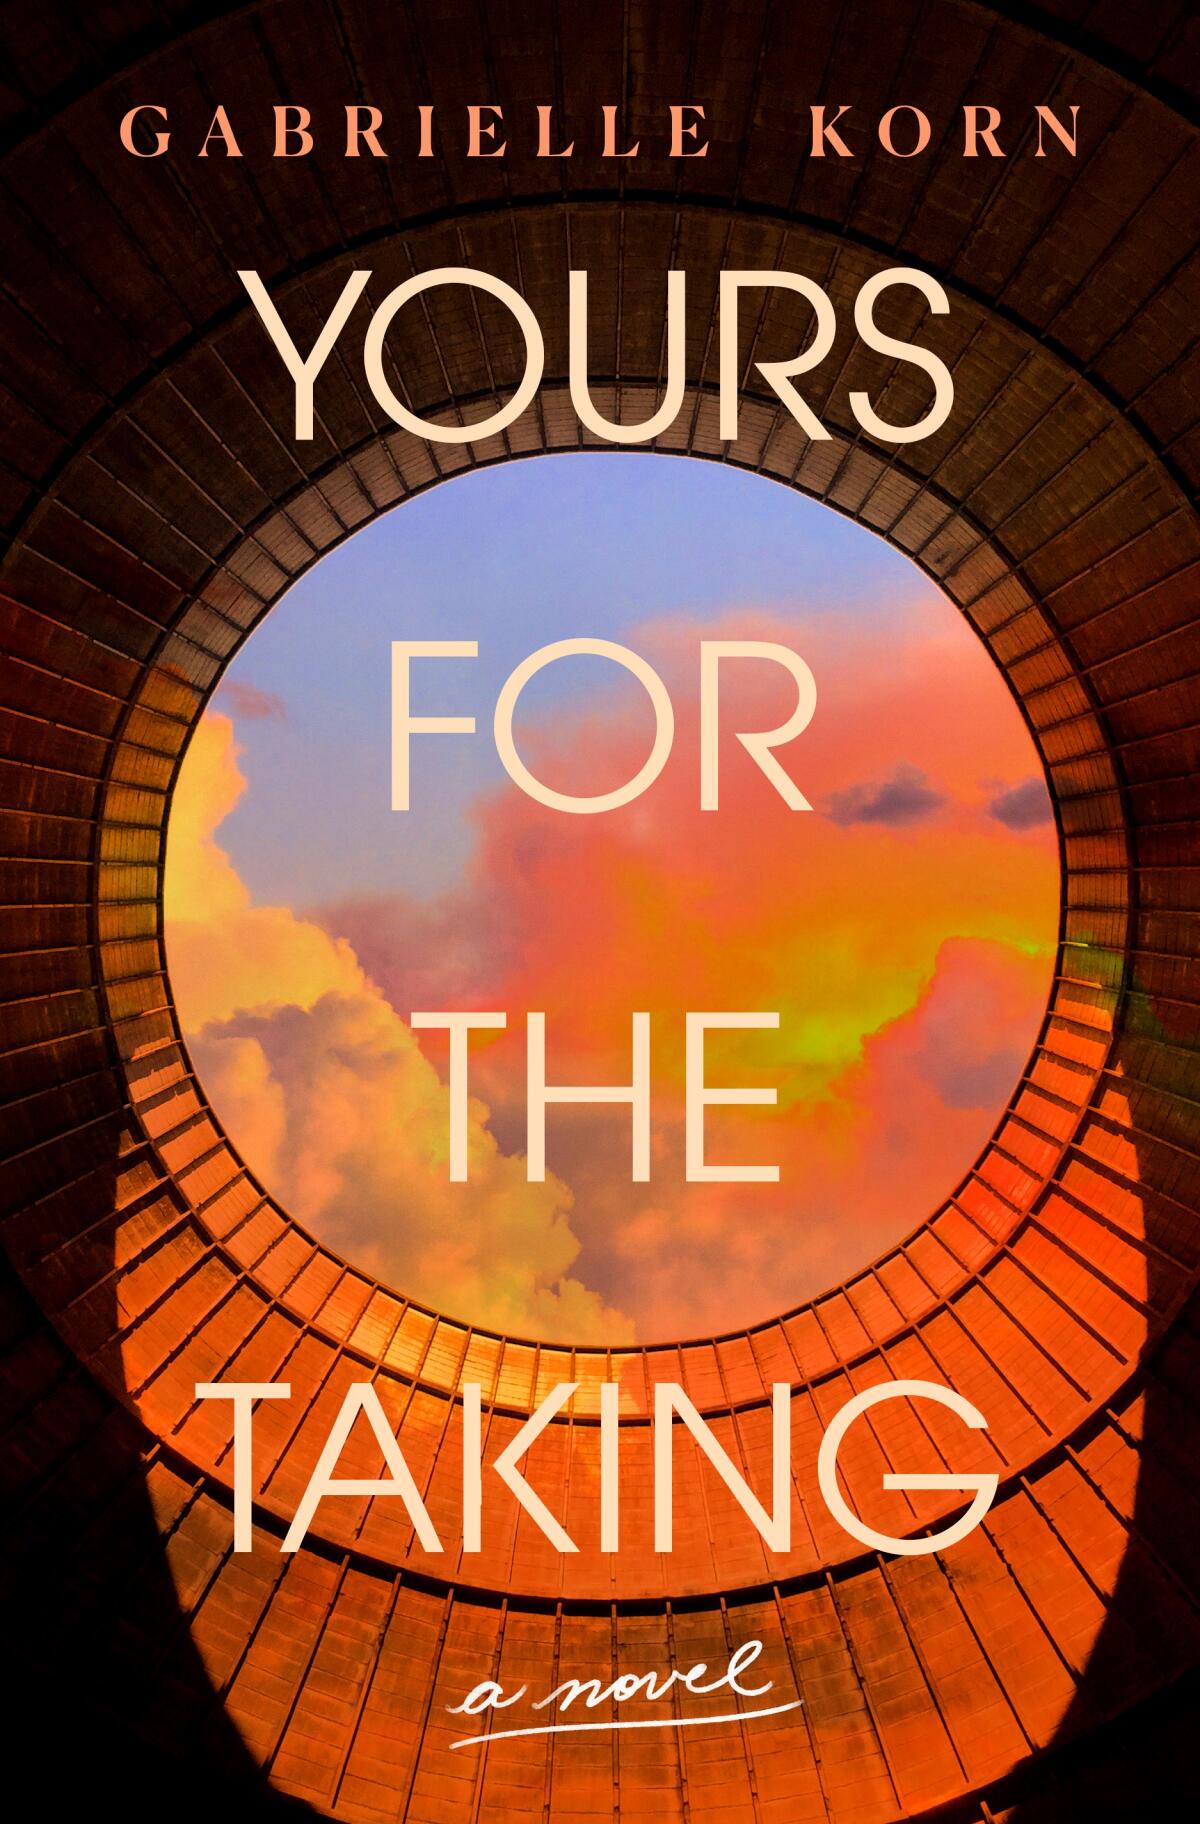 "Yours for the Taking" by Gabrielle Korn